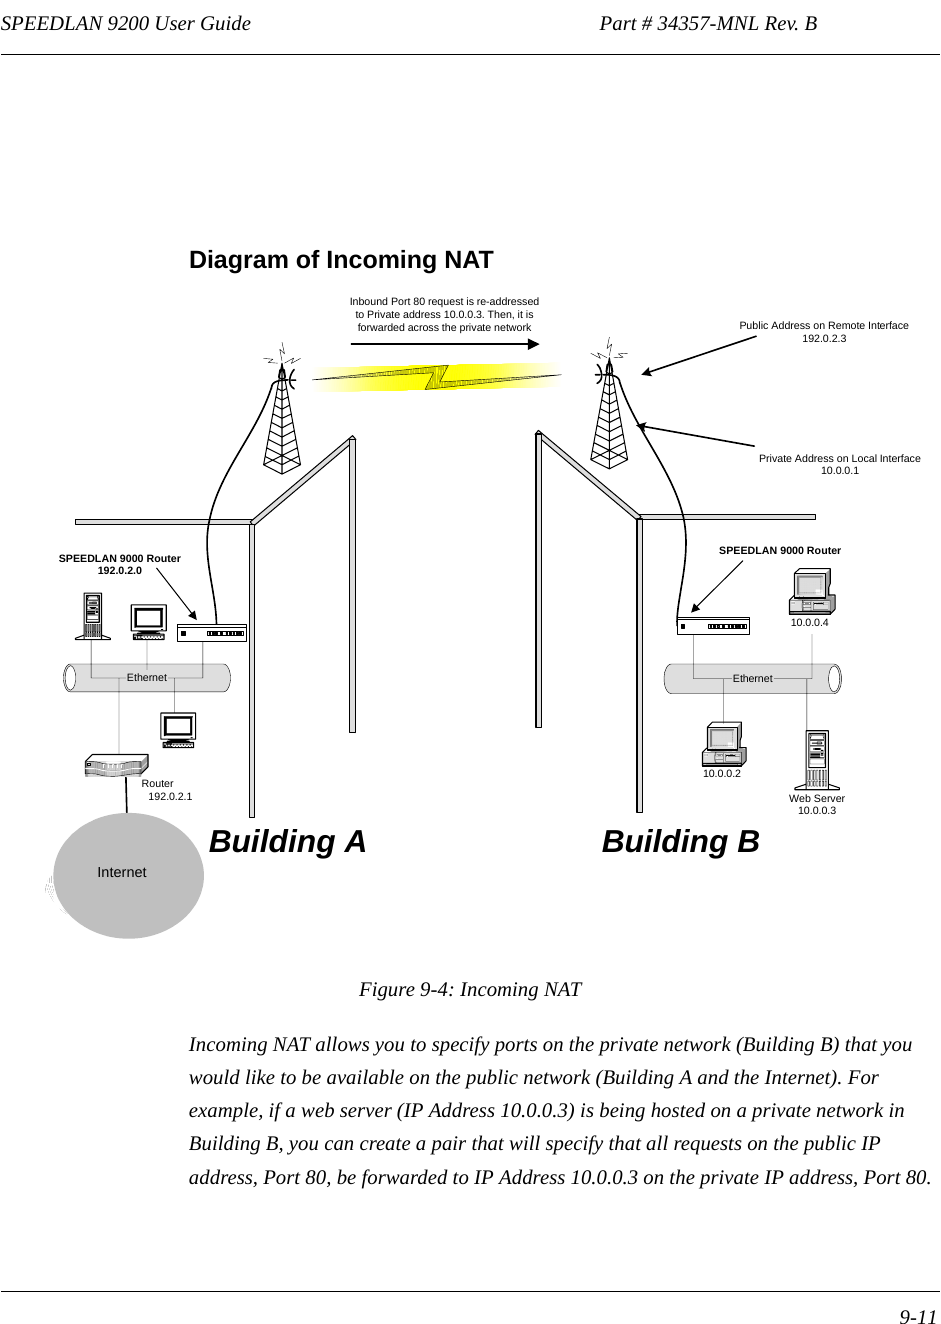 SPEEDLAN 9200 User Guide                                                                   Part # 34357-MNL Rev. B      9-11                                                                                                                                                              Diagram of Incoming NATFigure 9-4: Incoming NATIncoming NAT allows you to specify ports on the private network (Building B) that you would like to be available on the public network (Building A and the Internet). For example, if a web server (IP Address 10.0.0.3) is being hosted on a private network in Building B, you can create a pair that will specify that all requests on the public IP address, Port 80, be forwarded to IP Address 10.0.0.3 on the private IP address, Port 80.Inbound Port 80 request is re-addressedto Private address 10.0.0.3. Then, it isforwarded across the private networkInternetEthernet                               Router                                        192.0.2.1Private Address on Local Interface10.0.0.110.0.0.210.0.0.4EthernetWeb Server10.0.0.3Public Address on Remote Interface192.0.2.3Building A Building BSPEEDLAN 9000 Router192.0.2.0SPEEDLAN 9000 RouterInternet